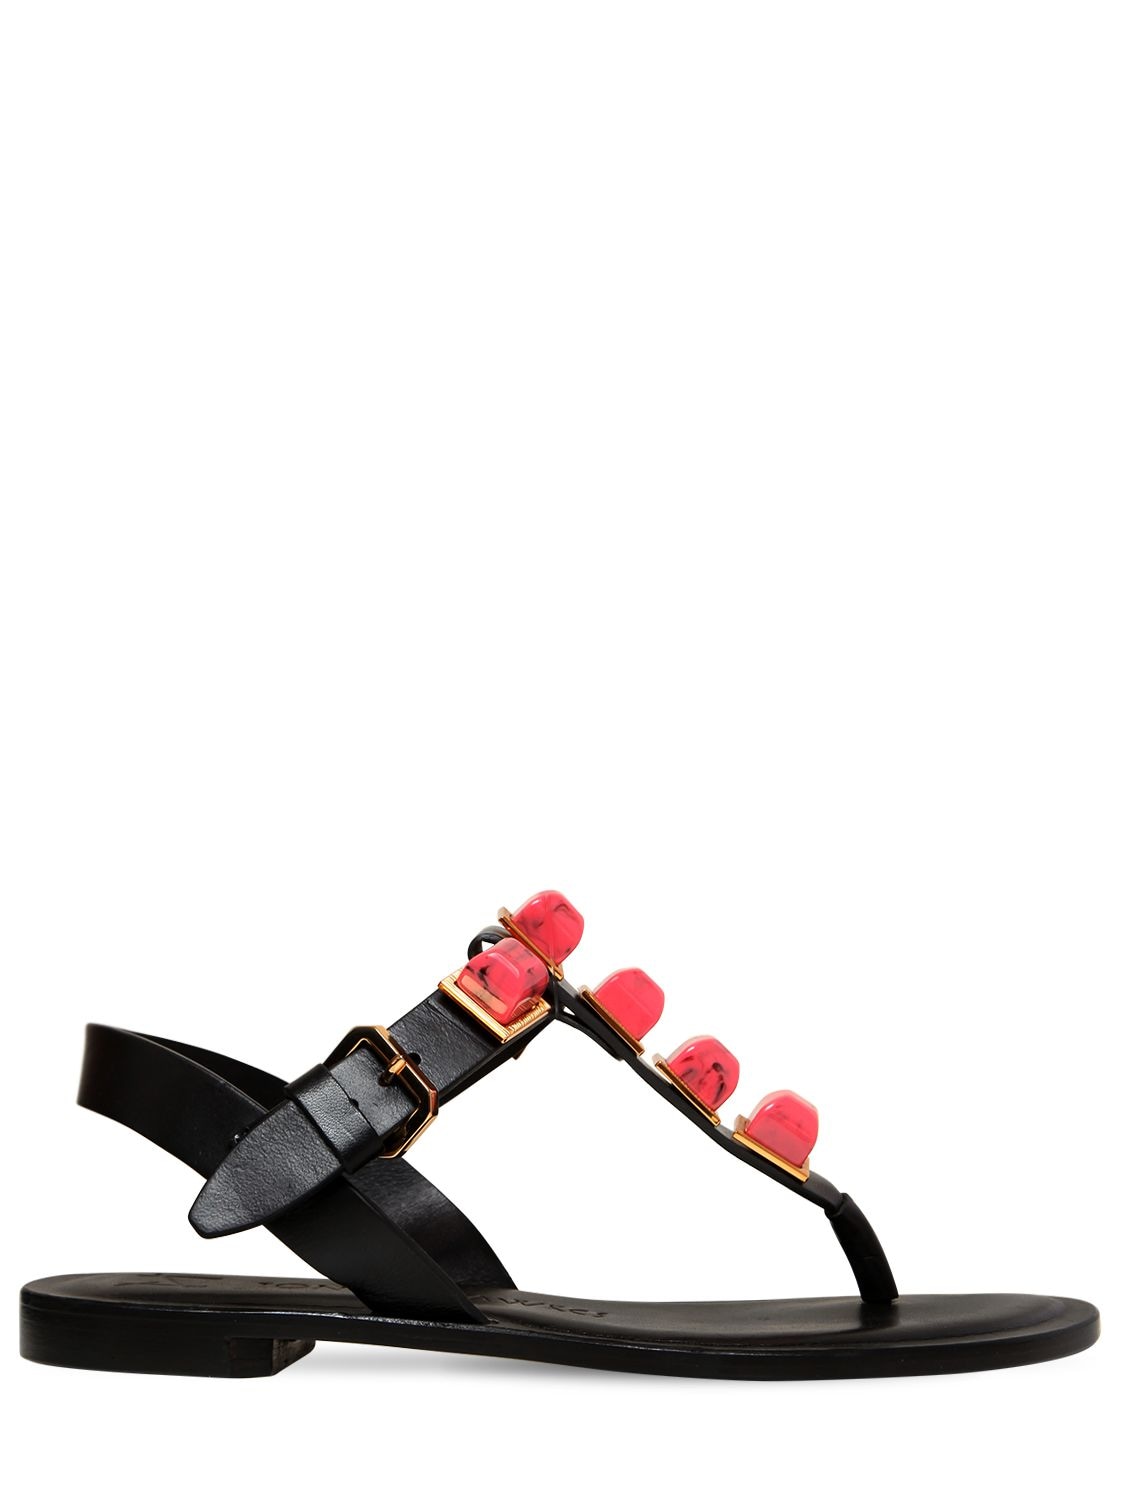 Tonya Hawkes 10mm Gaia Resin Stones Leather Sandals In Black,coral